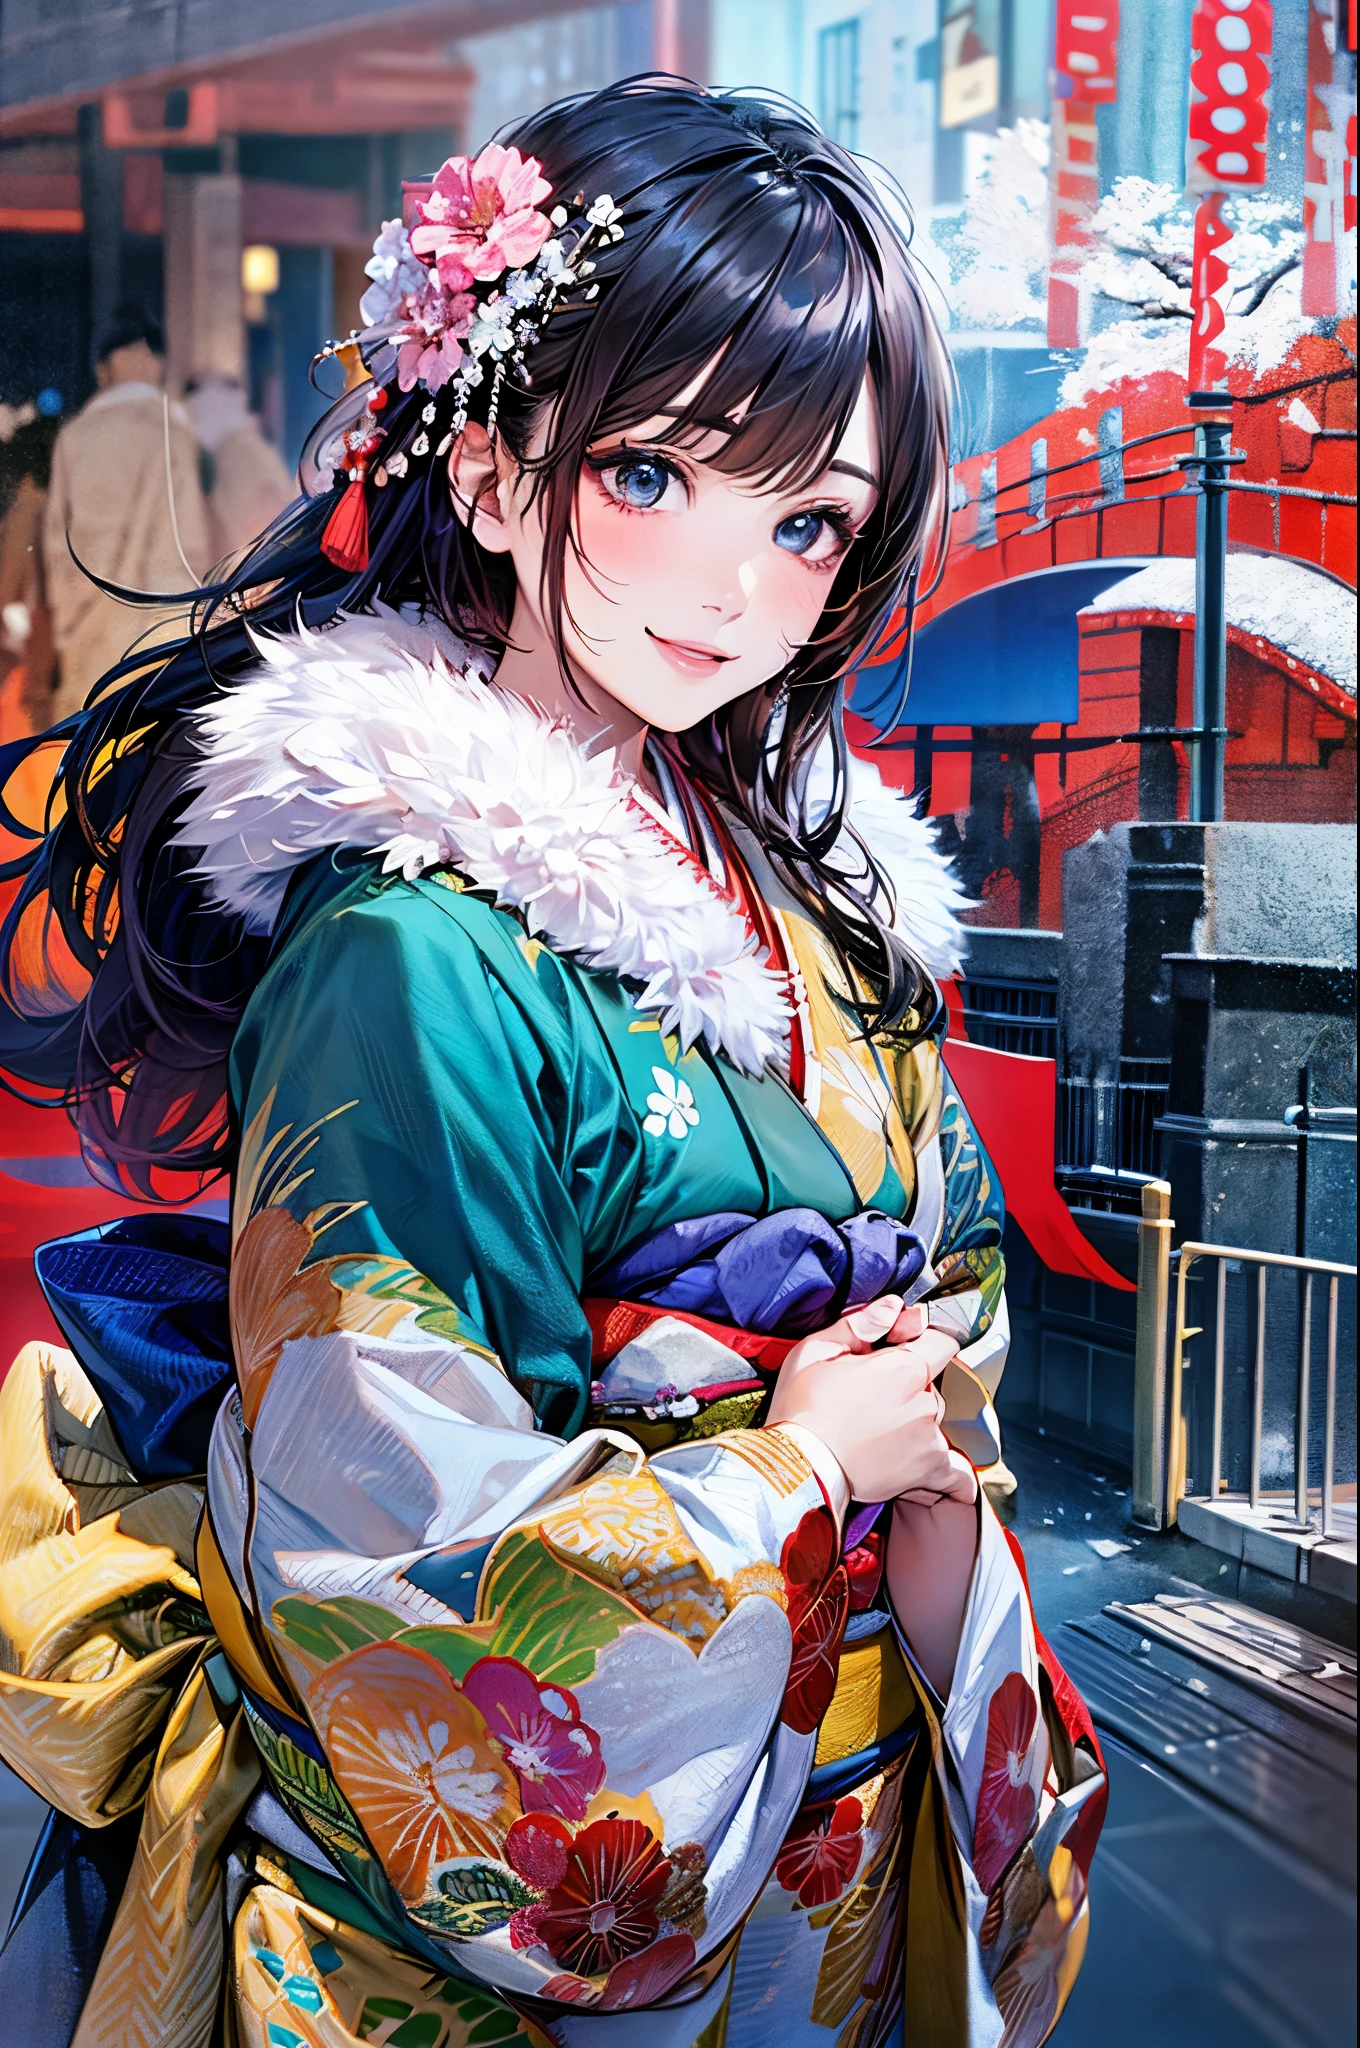 ((perfect anatomy, anatomically correct, super detailed skin)), 
1 girl, japanese, high school girl, shiny skin, large breasts:0.5, looking away, looking up, watching the view, from below, 
beautiful hair, beautiful face, beautiful detailed eyes, (middle hair:1.5, japanese hair:1.5), black hair, blue eyes, babyface, mole under eye, 
((red floral kimono, hair ornament)), 
((smile:1.5, open your mouth wide)), walking, 
(beautiful scenery), winter, dawn, (new year's day, first visit), hokkaido, sapporo, outside hokkaido shrine, crowd, snow, snowfall:1.5, freezing weather, frost, 
(8k, top-quality, masterpiece​:1.2, extremely detailed), (photorealistic), beautiful illustration, cinematic lighting,